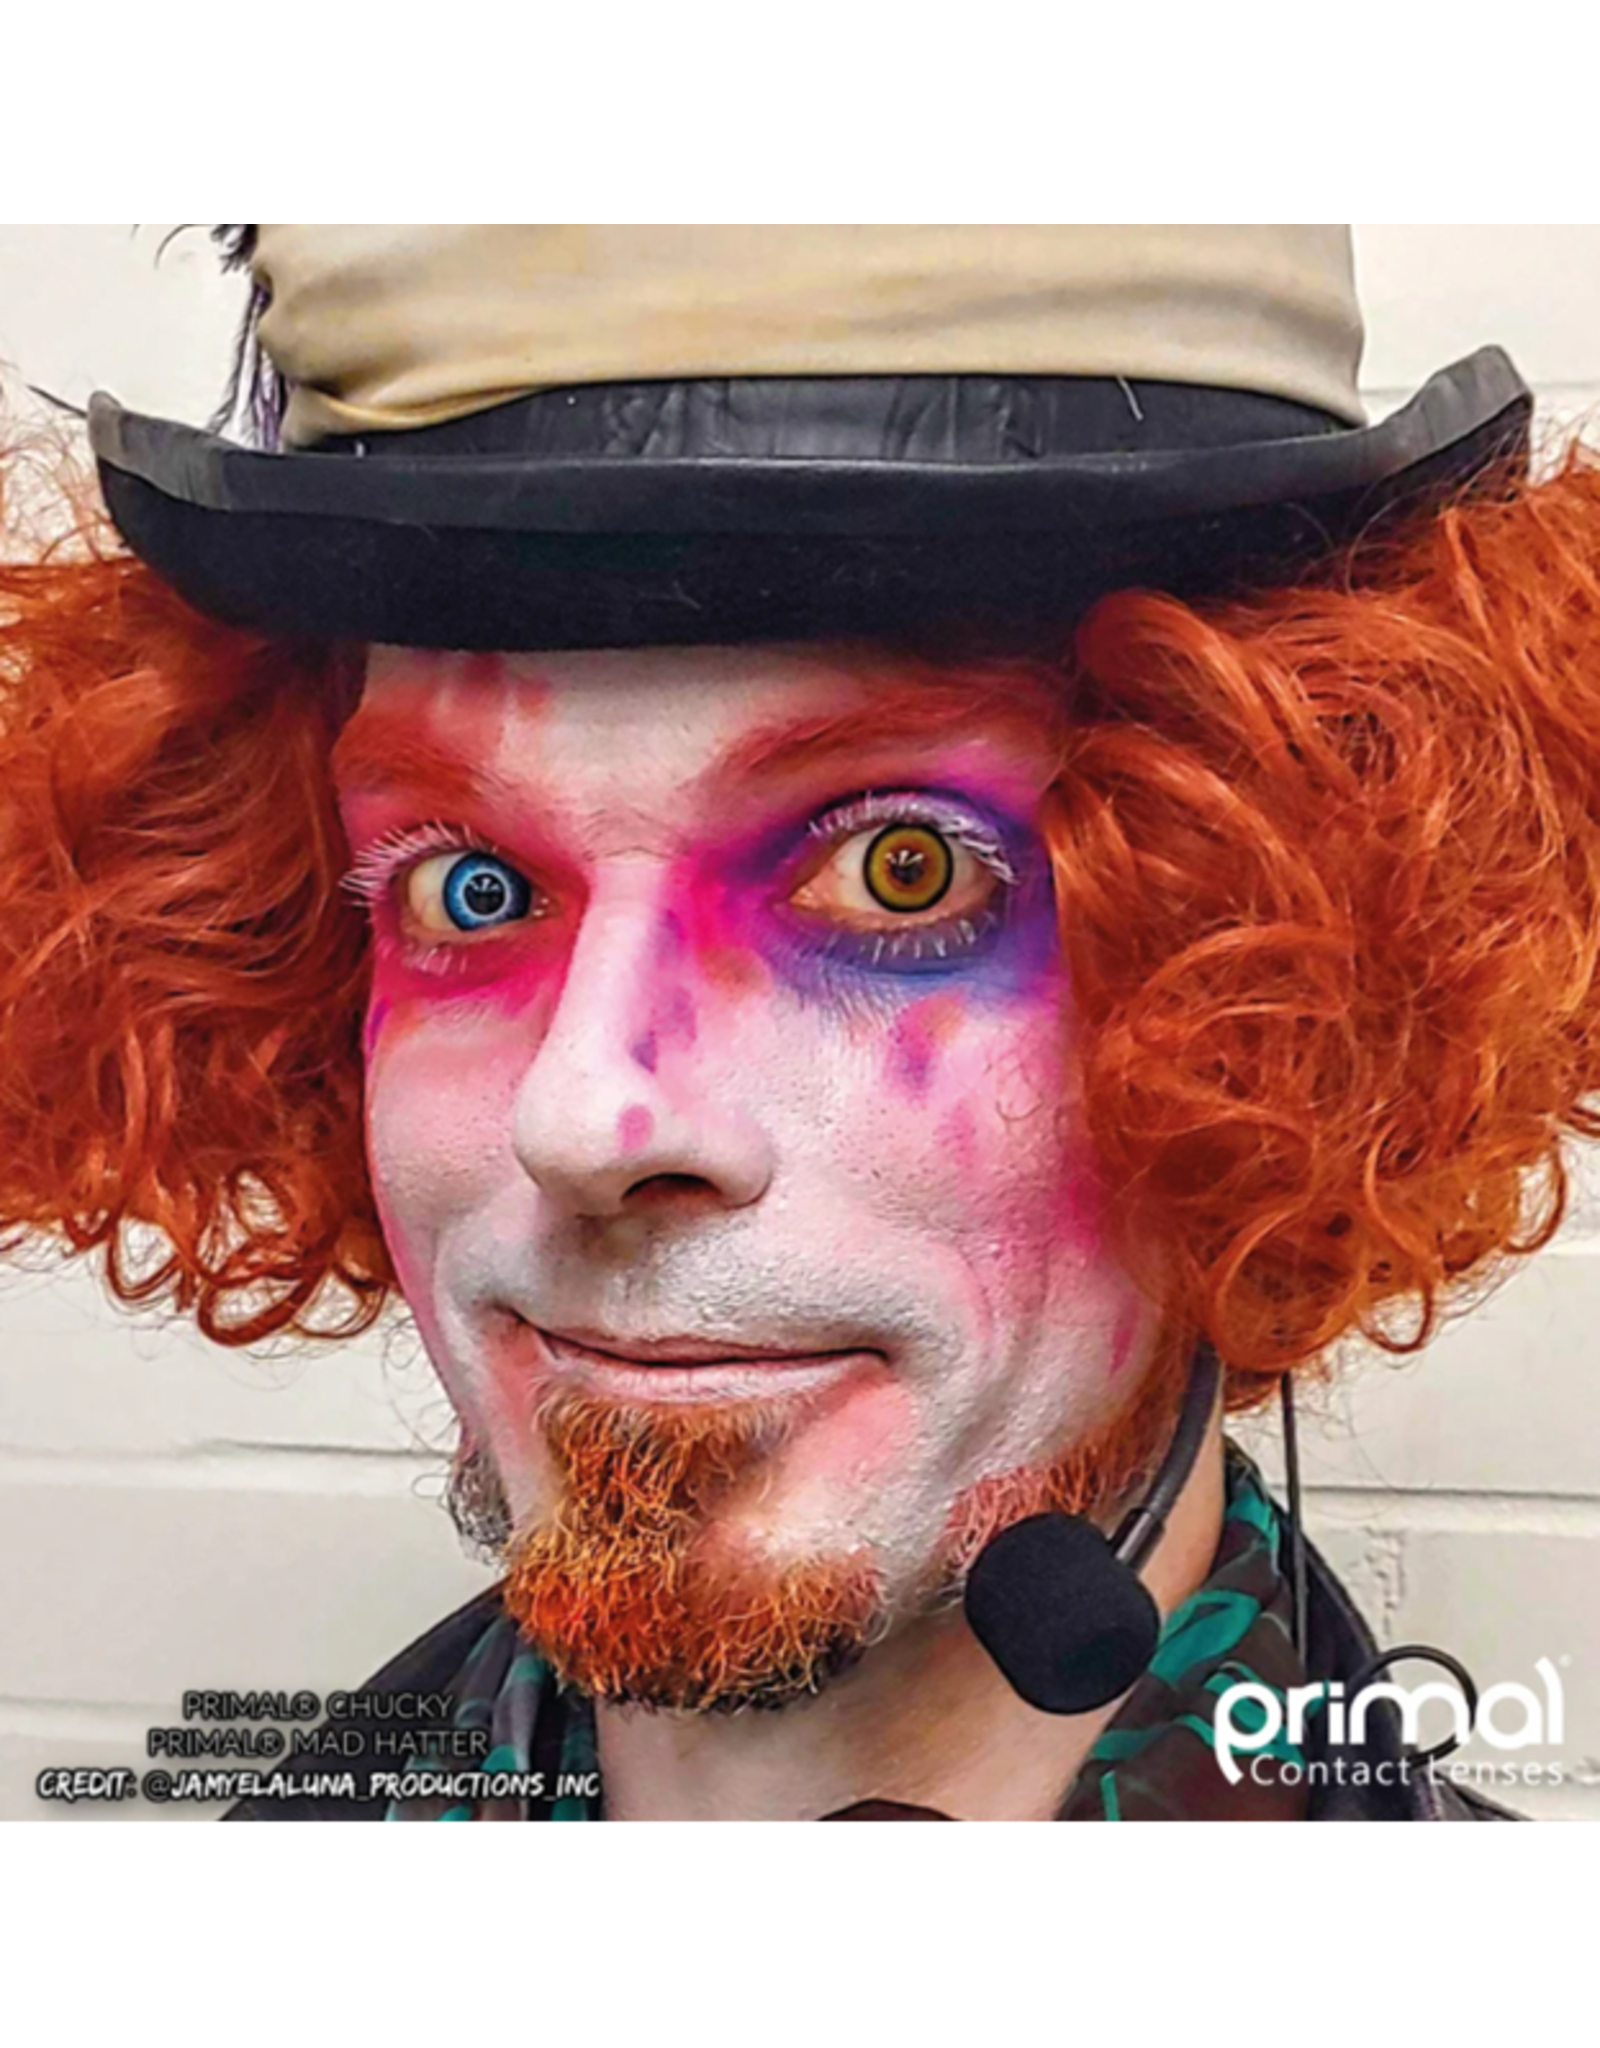 Primal Costume Contact Lenses - 894 Madhatter